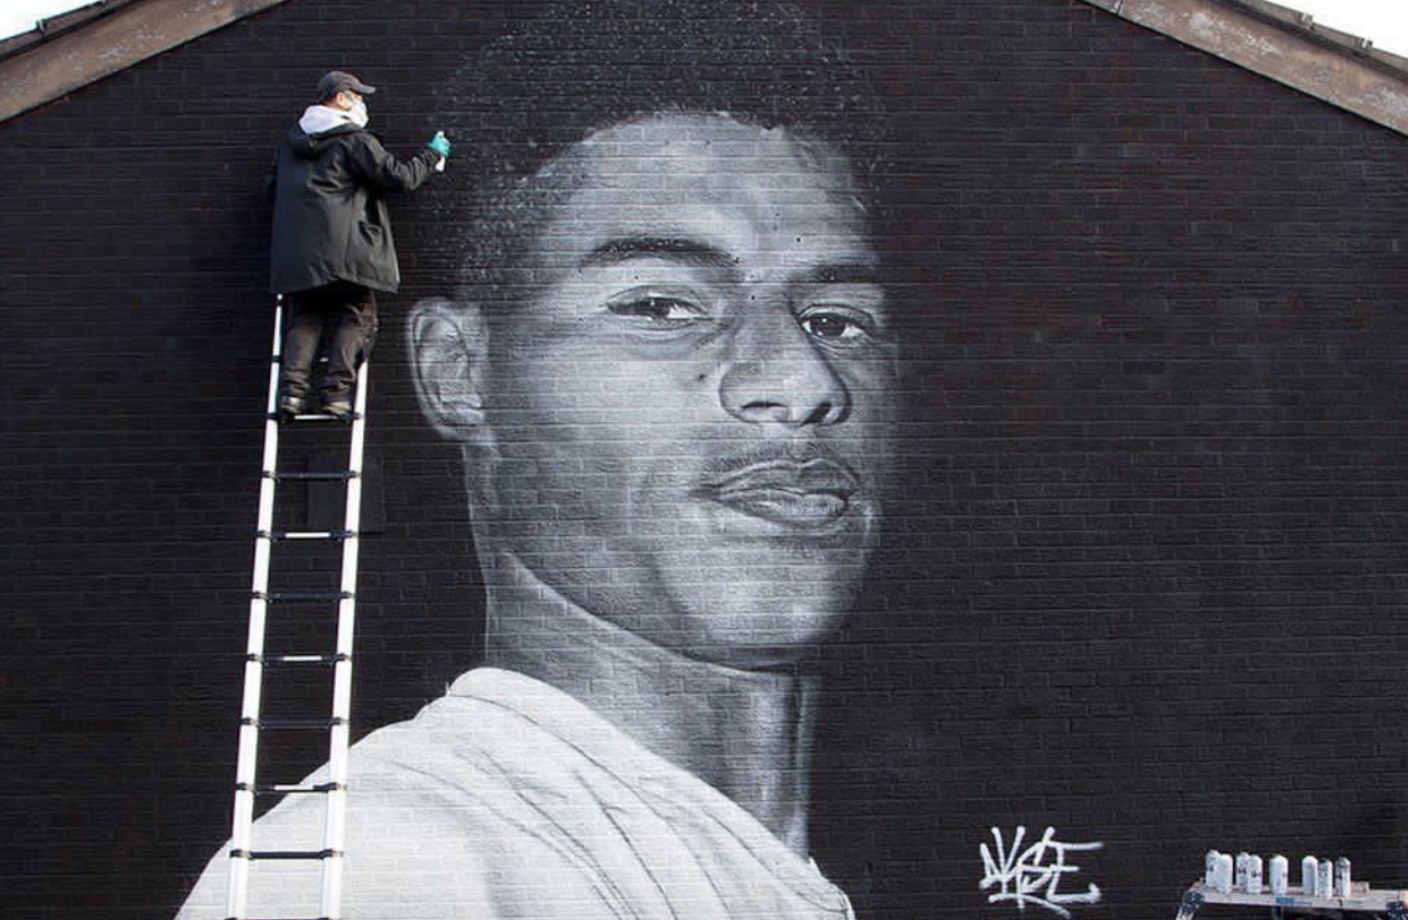 Police release CCTV footage in hunt for the Marcus Rashford mural vandal, The Manc